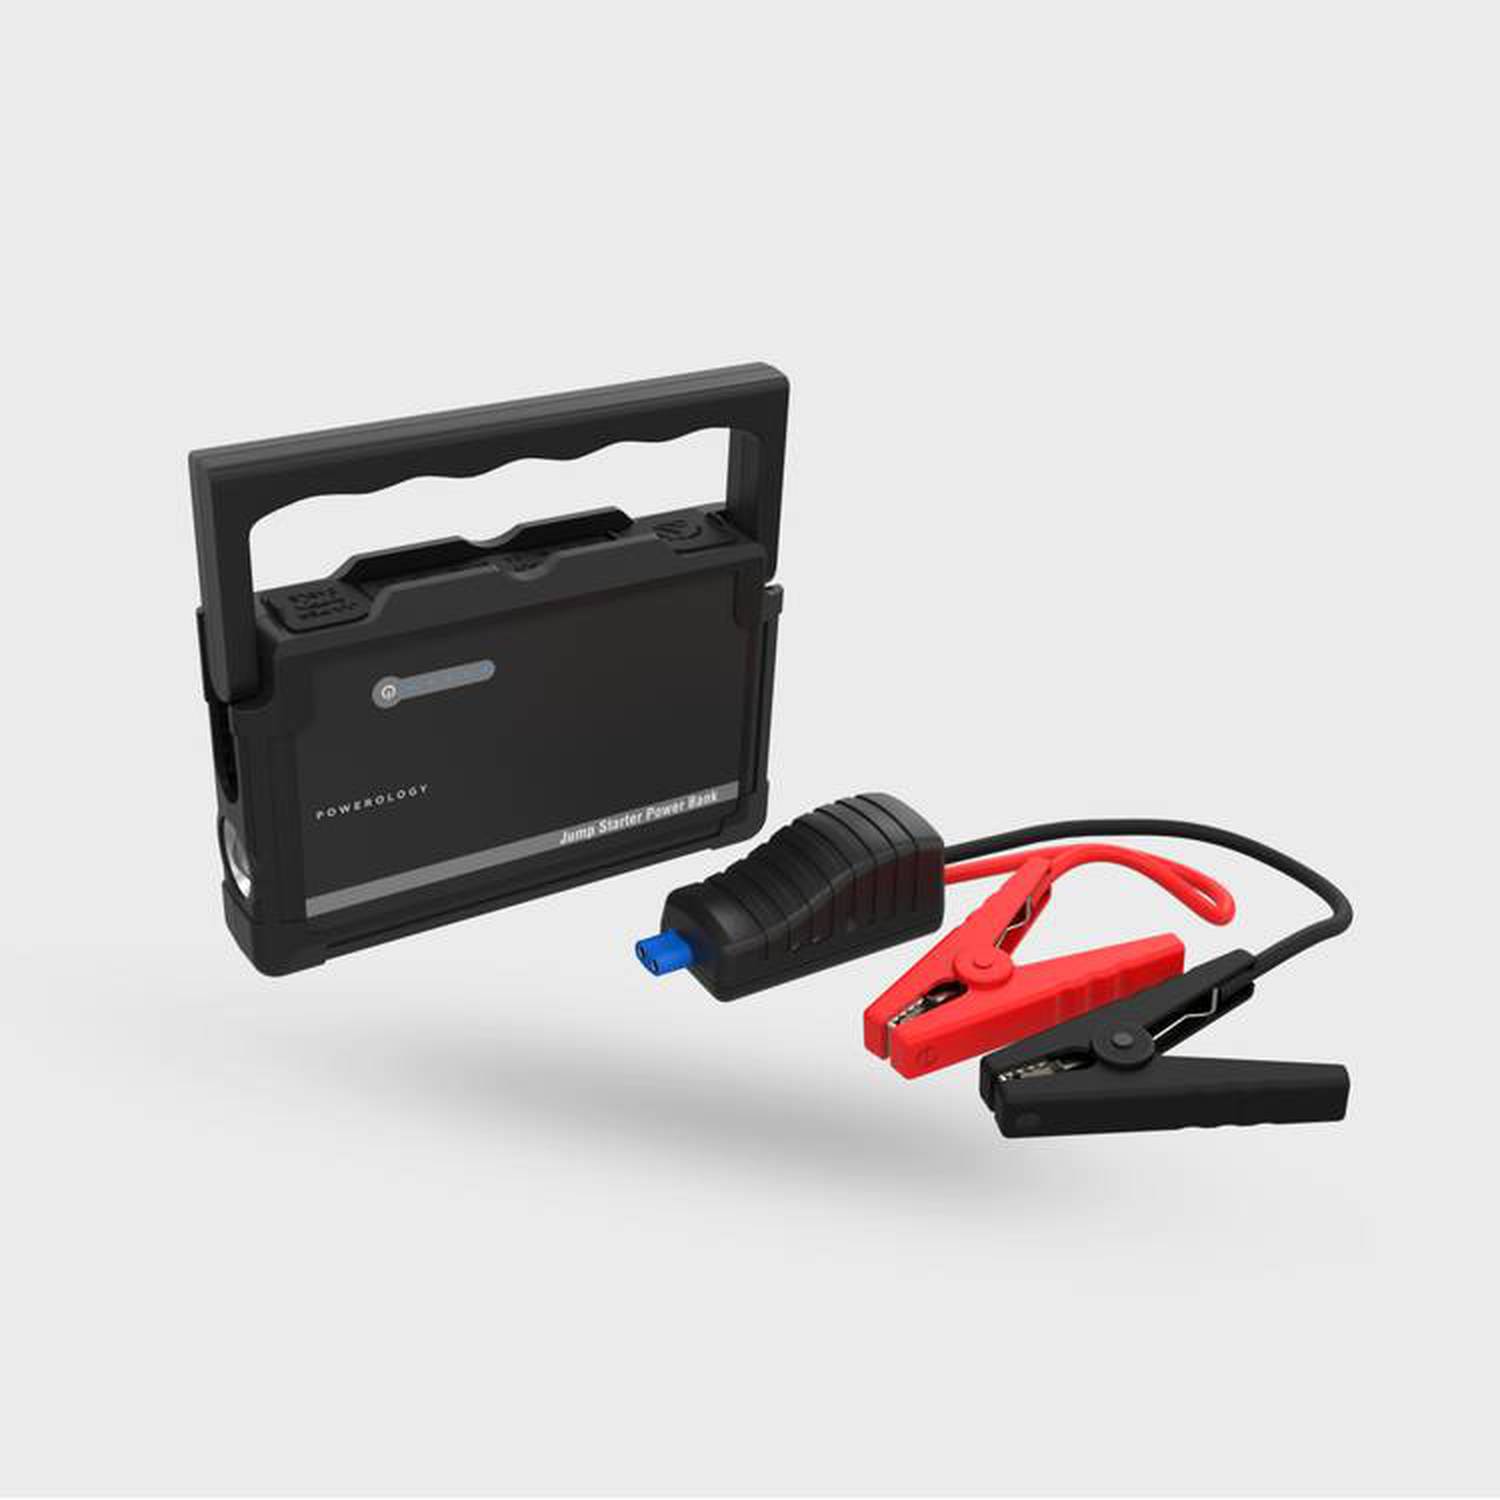 Powerology 11200mAh Jump Starter With Air Compressor And USB